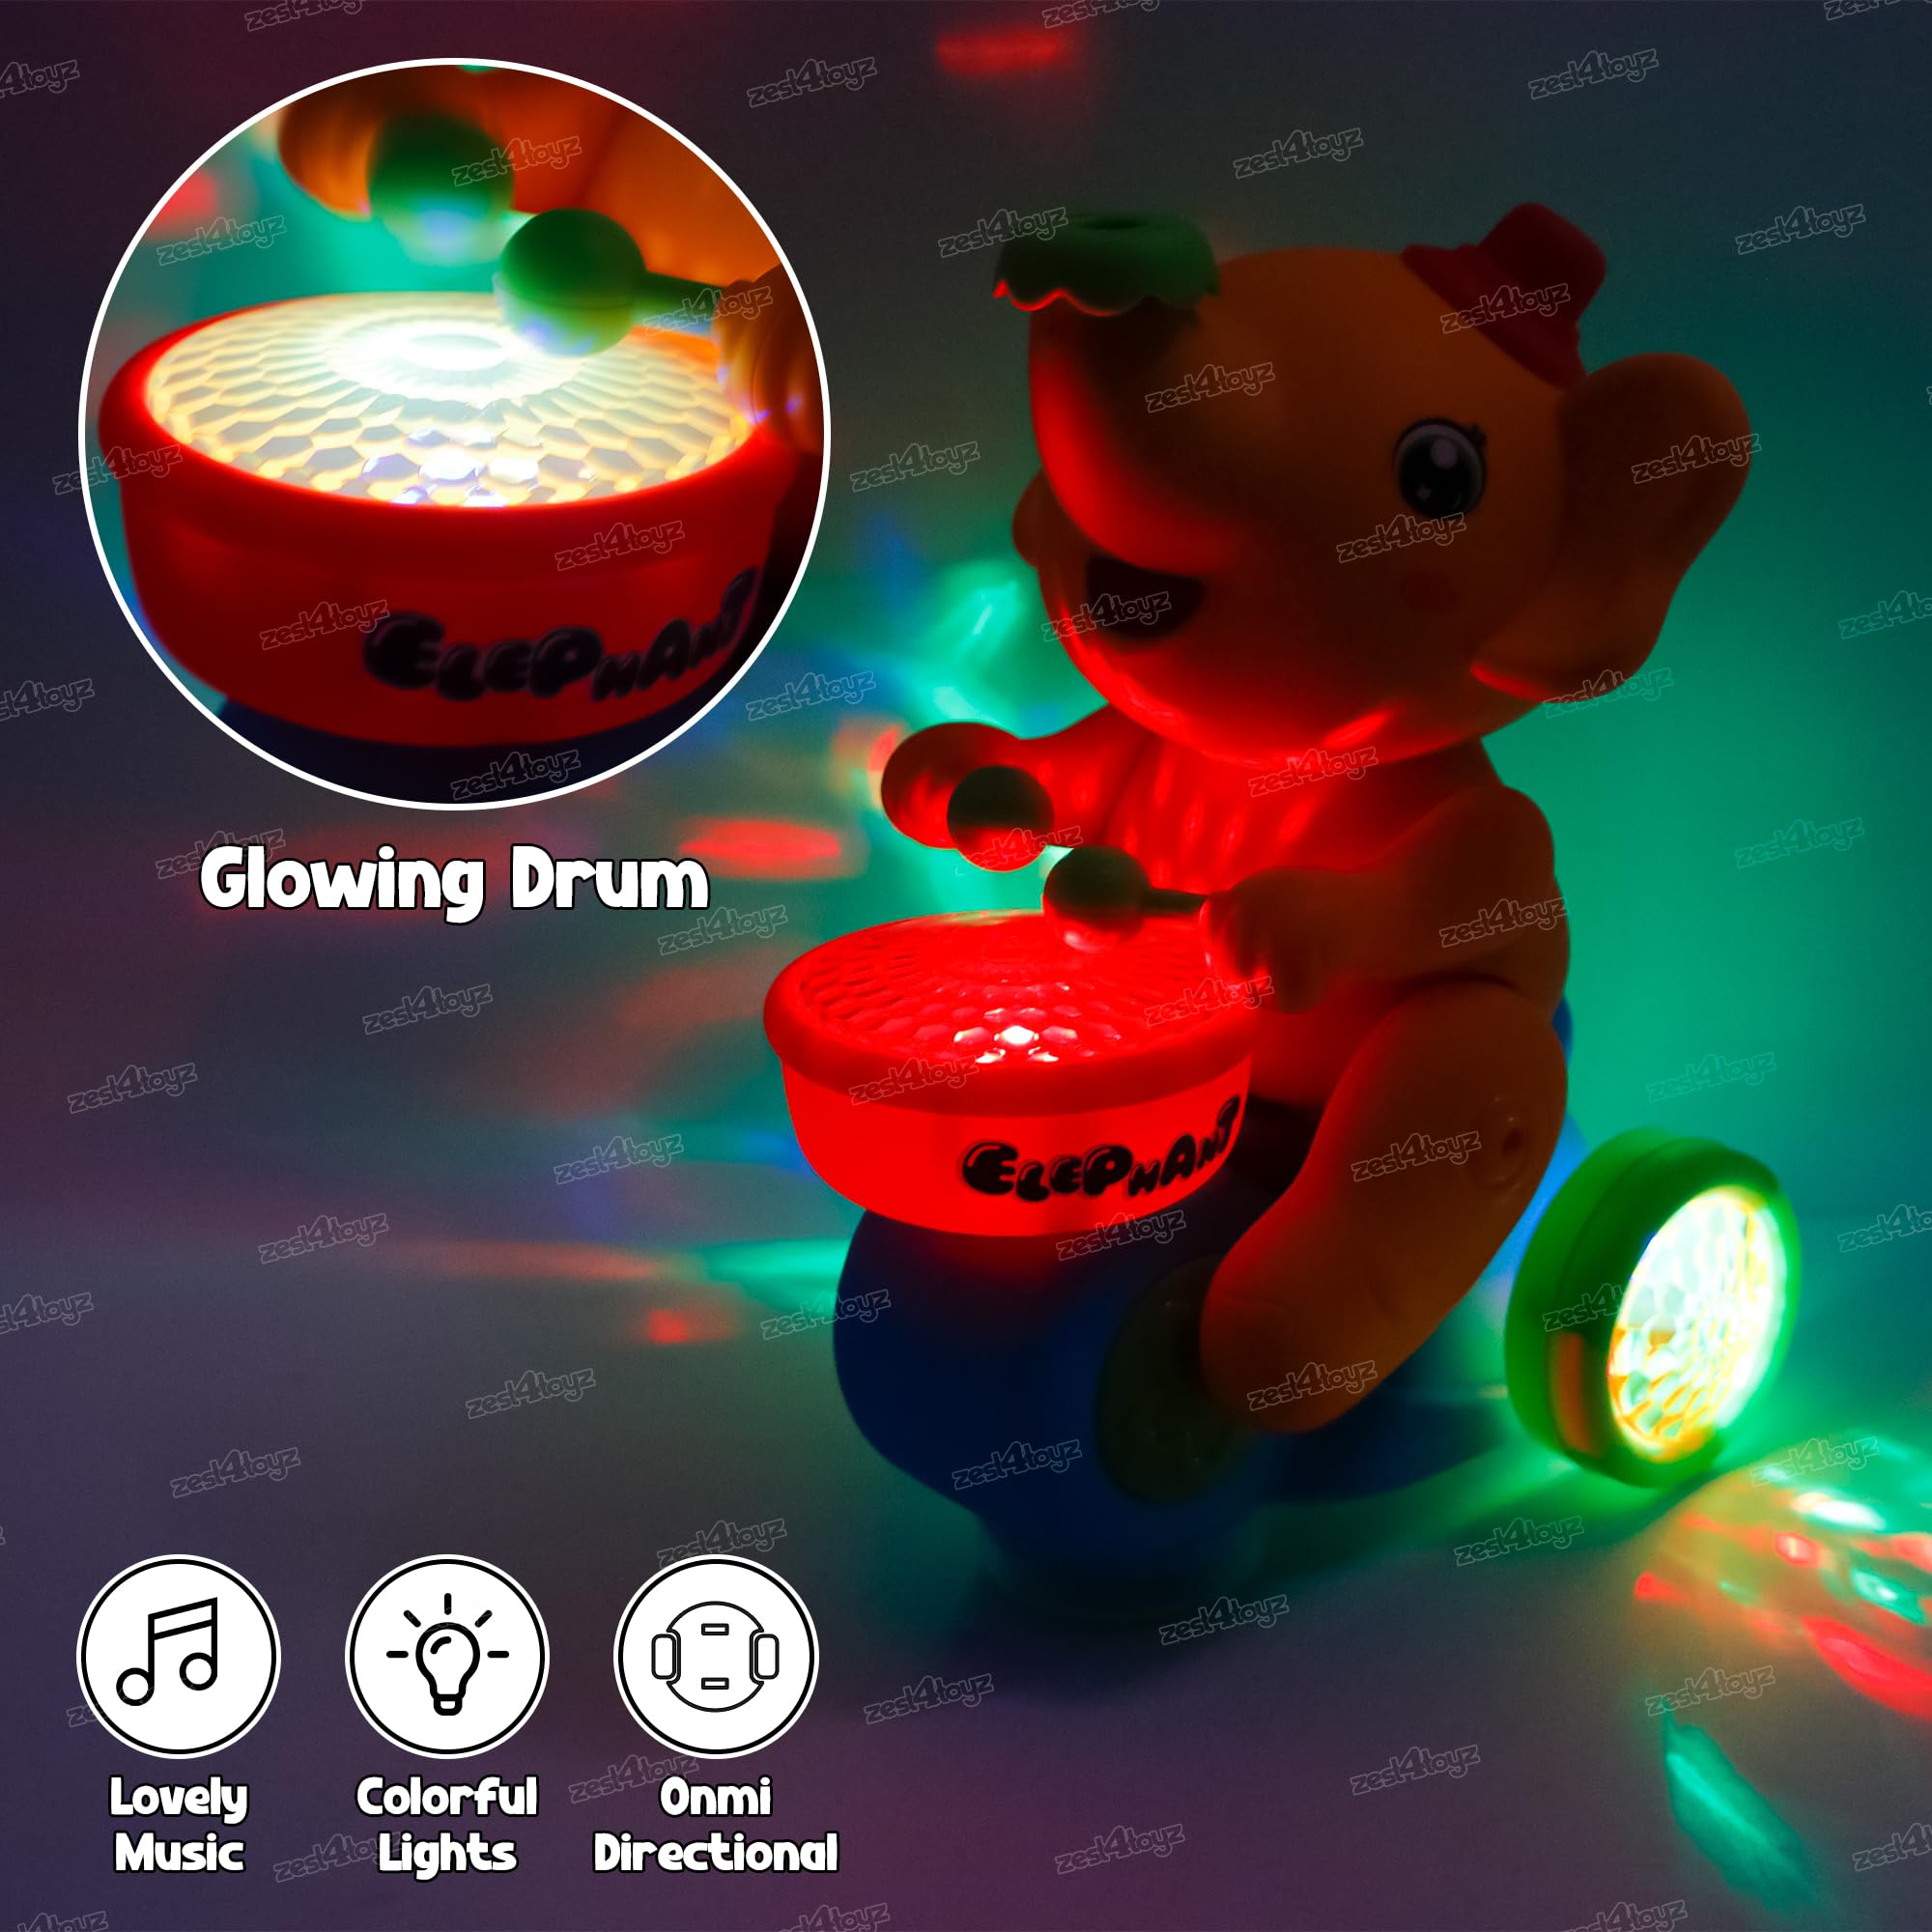 Zest 4 Toyz Musical Walking Elephant Drummer Toy with Flashing Light & Sound Toy for Kids Beating Drum Blowing Ball Toy - Yellow